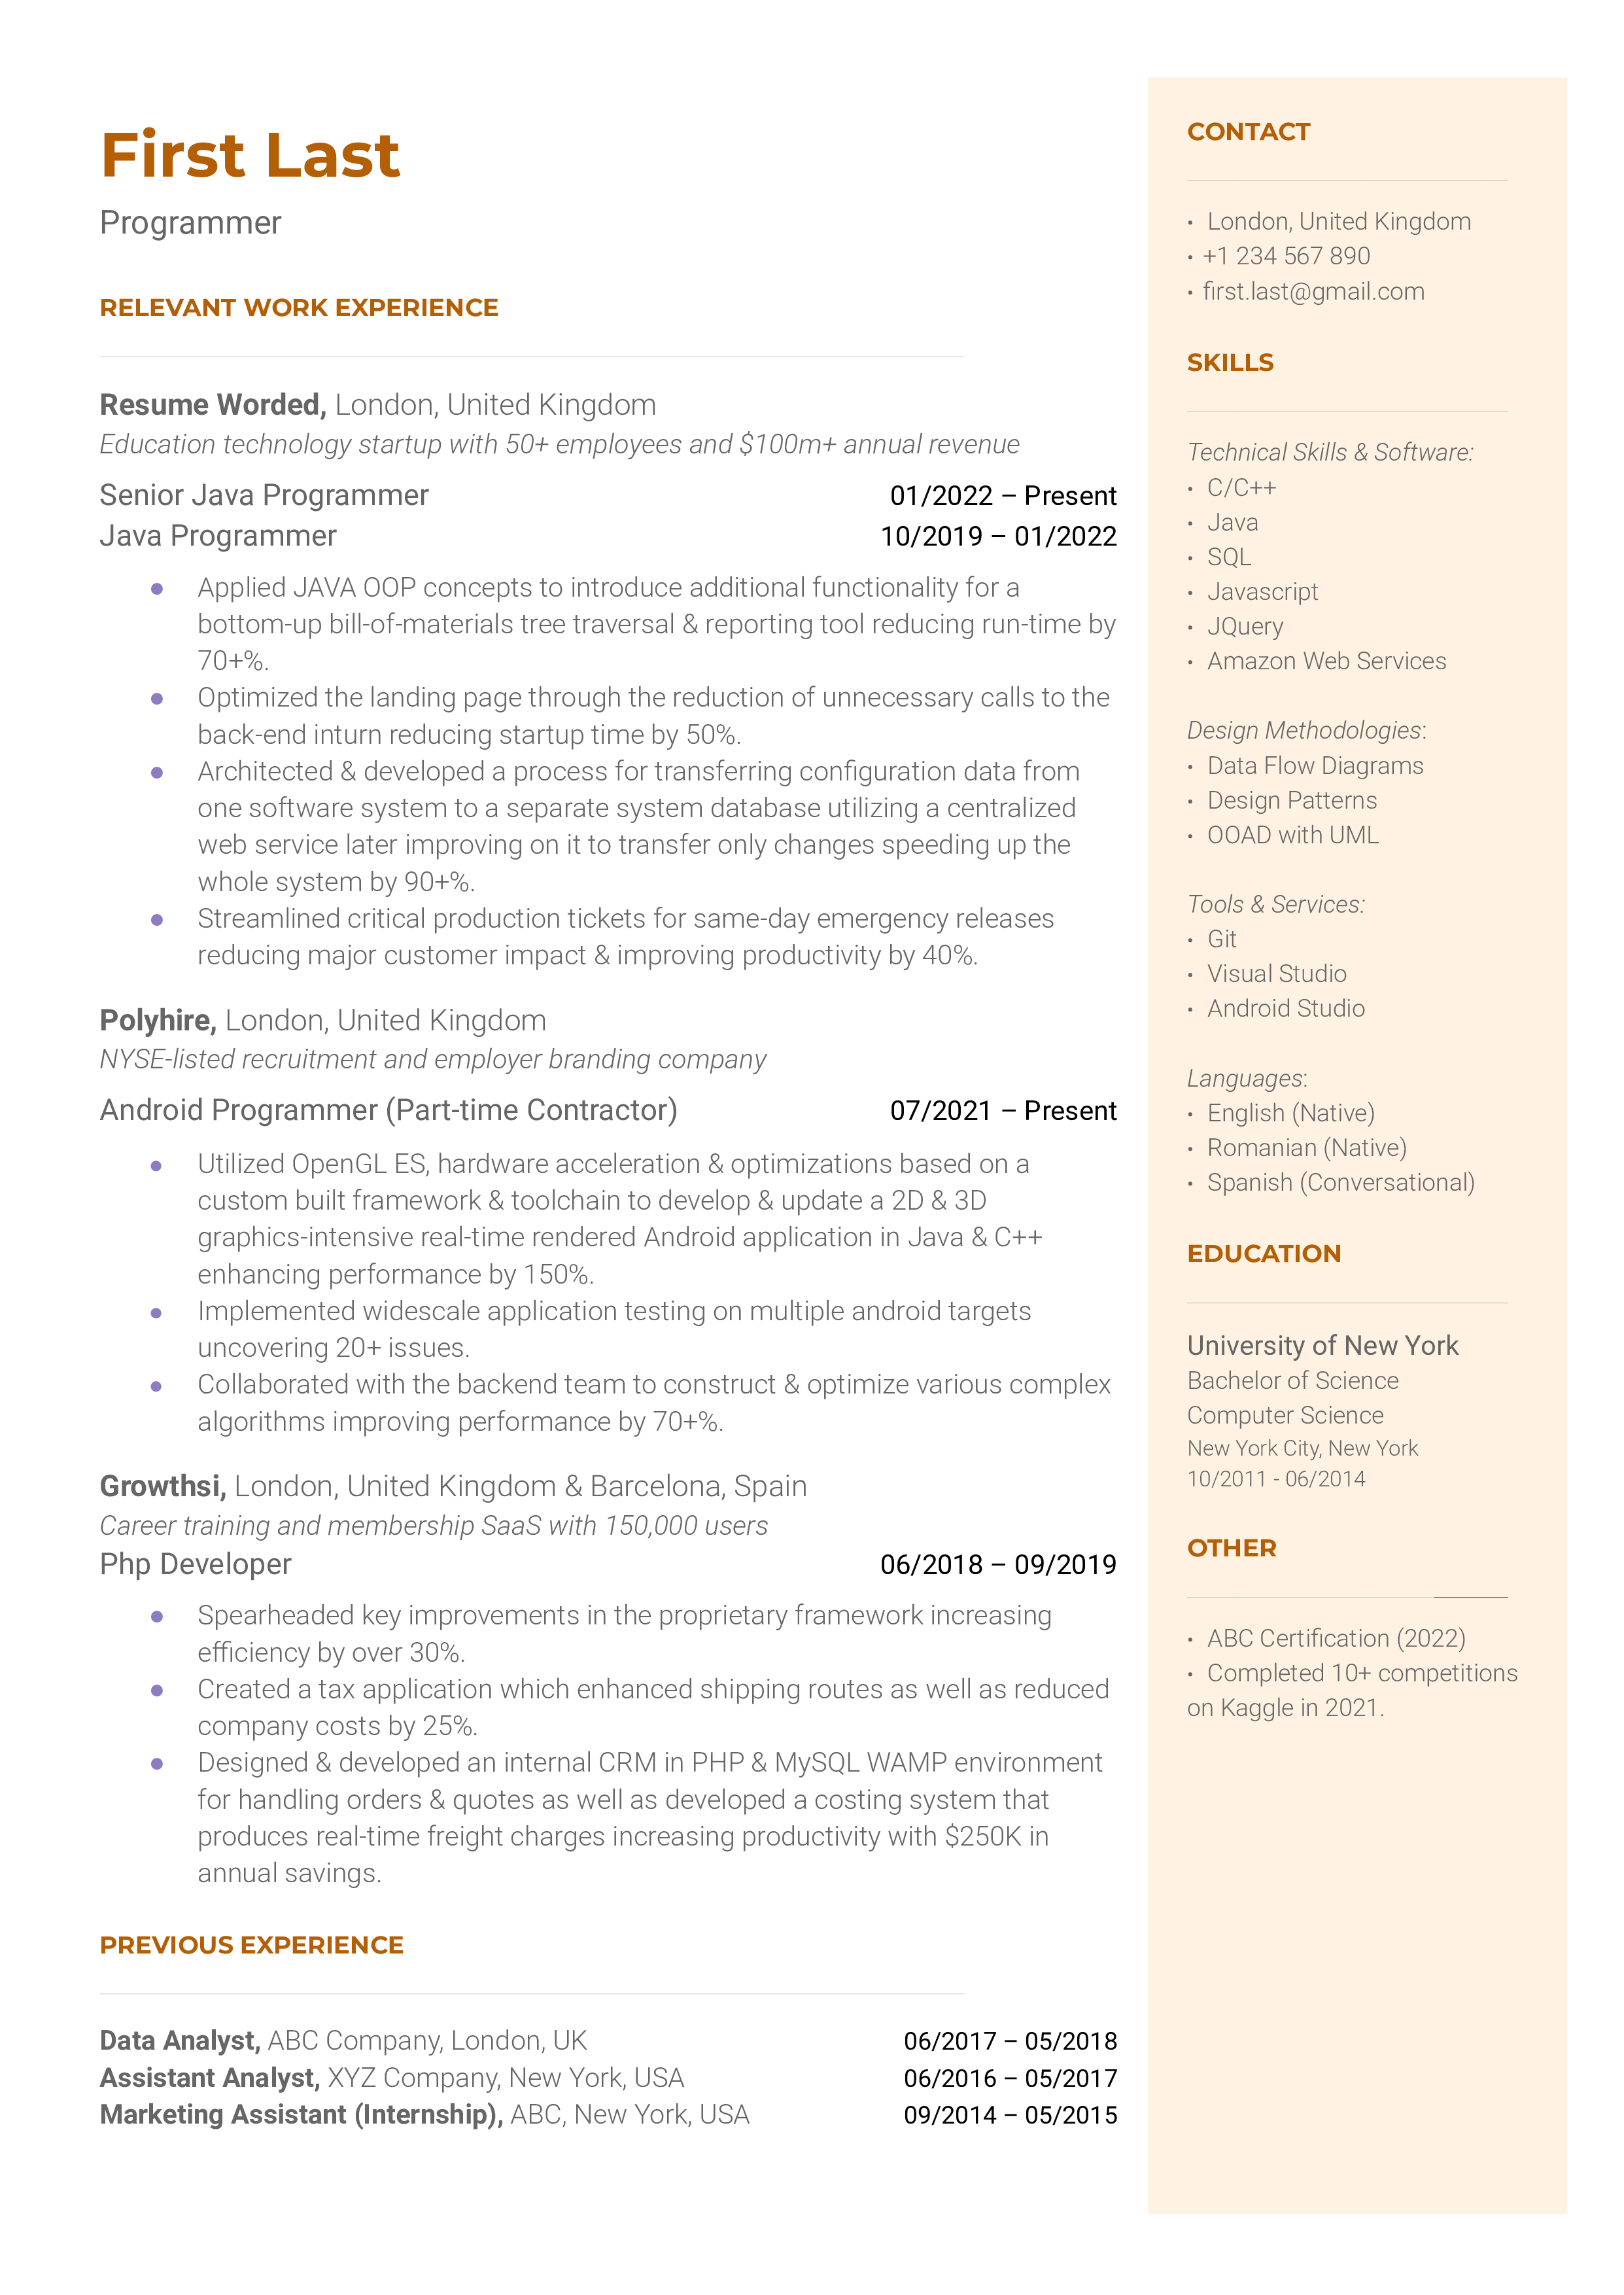 A programmer resume template that showcases industry experience, skills, and certifications